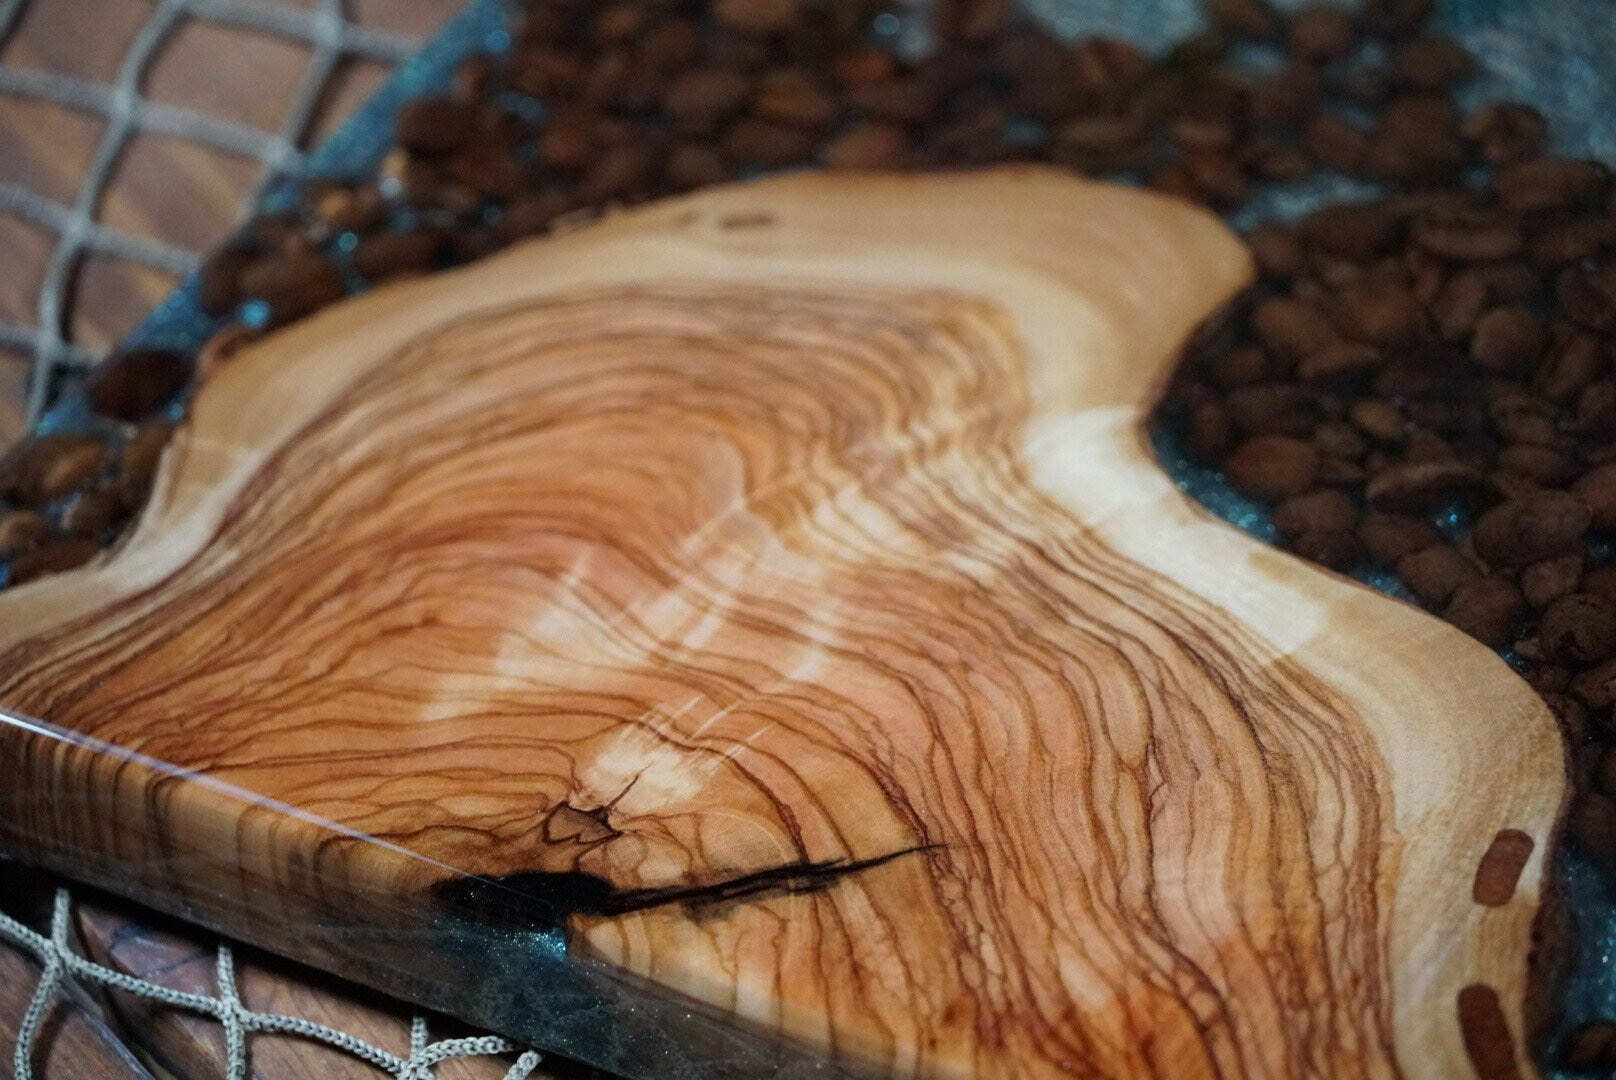 Coffee Bean and Olive wood Serving Tray, Charcuterie Board